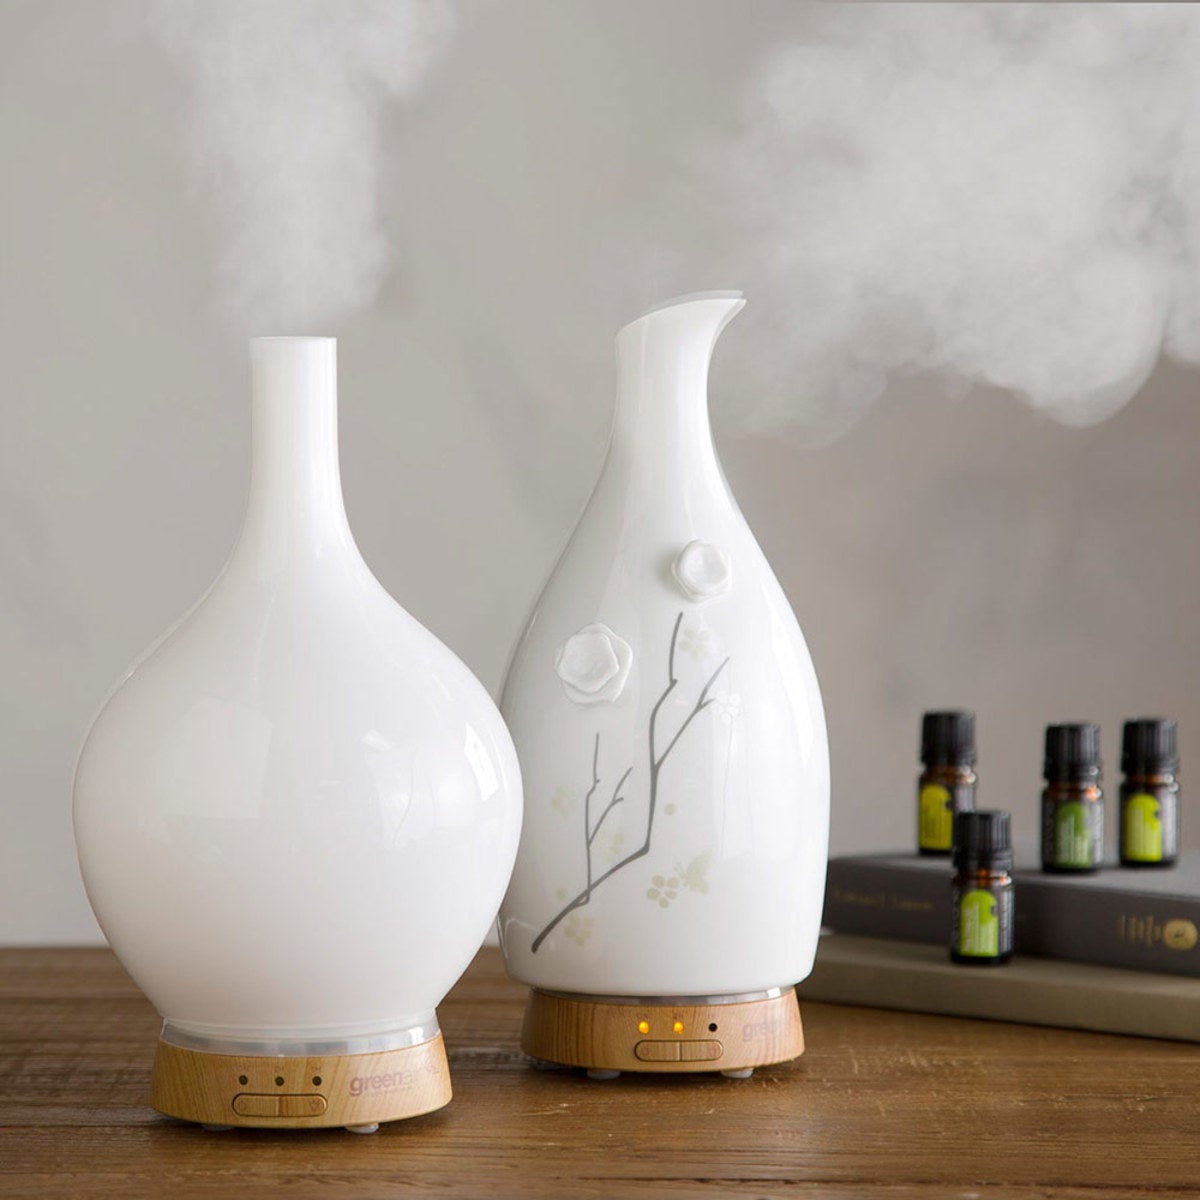 Aromatherapy Vase Diffusers & Therapeutic Essential Oils